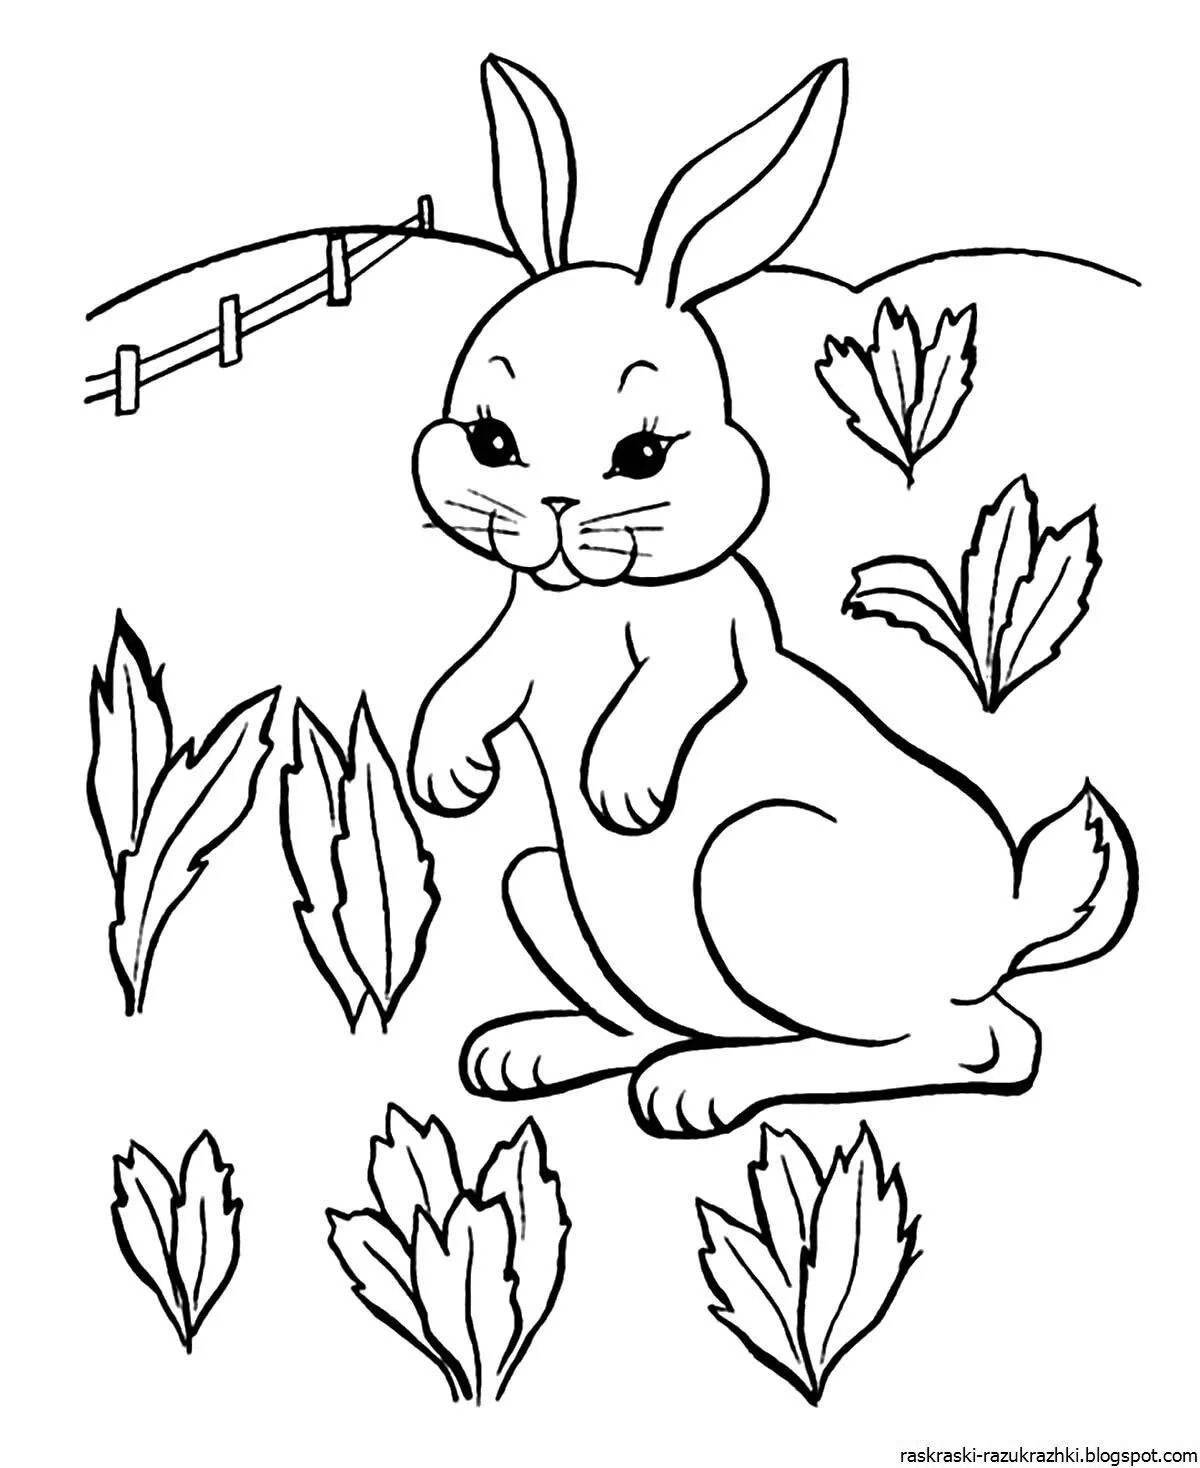 Coloring page friendly rabbit